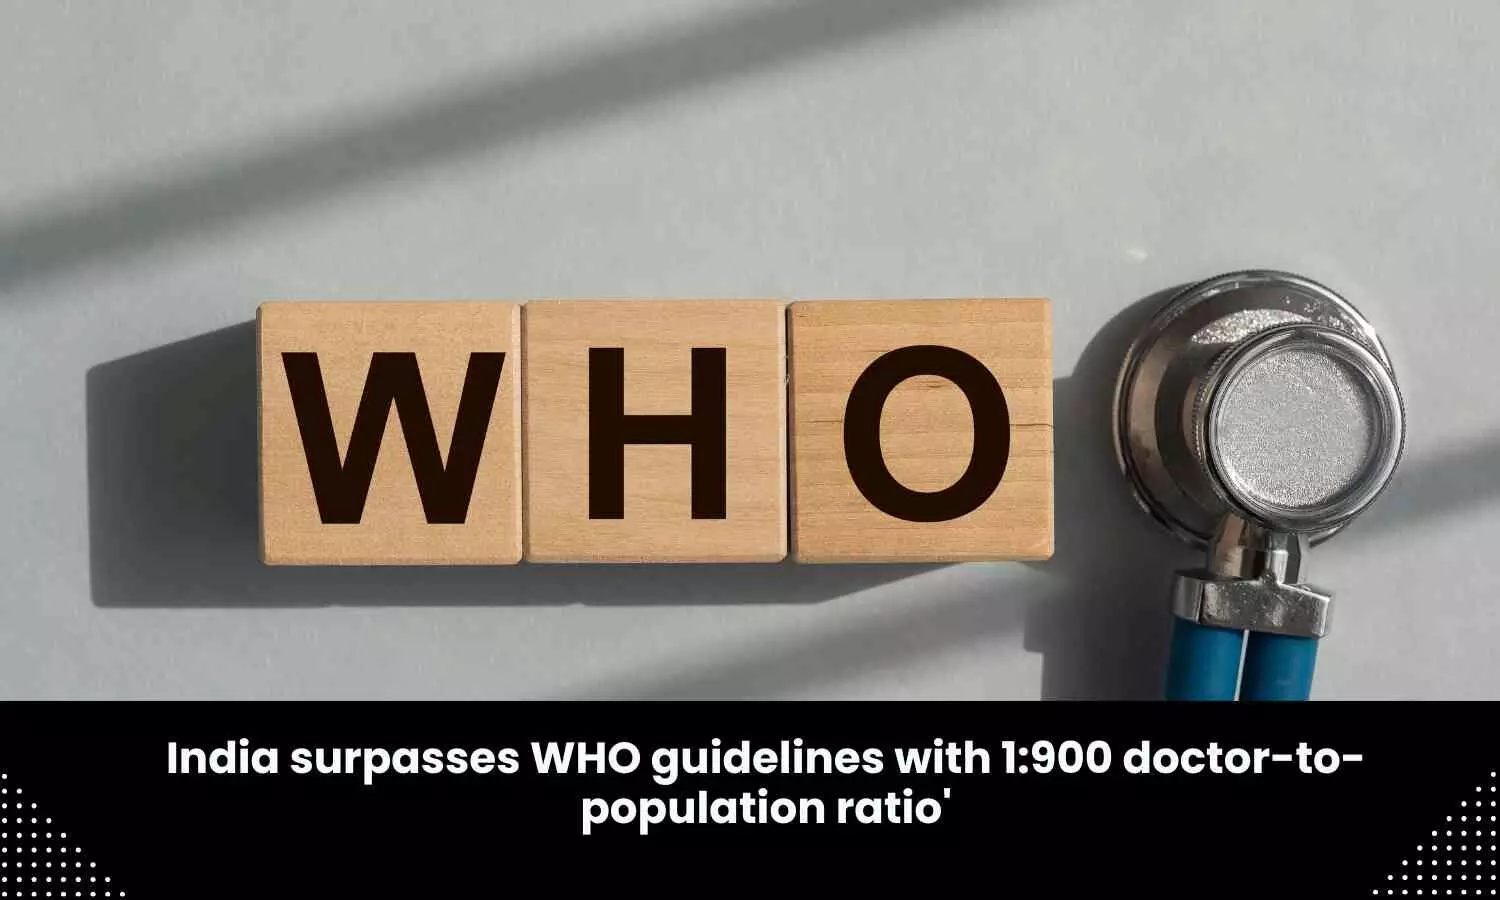 WHO recommends Doctor-To-Population ratio of 1:1000, India have achieved a ratio of 1:900, says Bhubaneswar Kalita